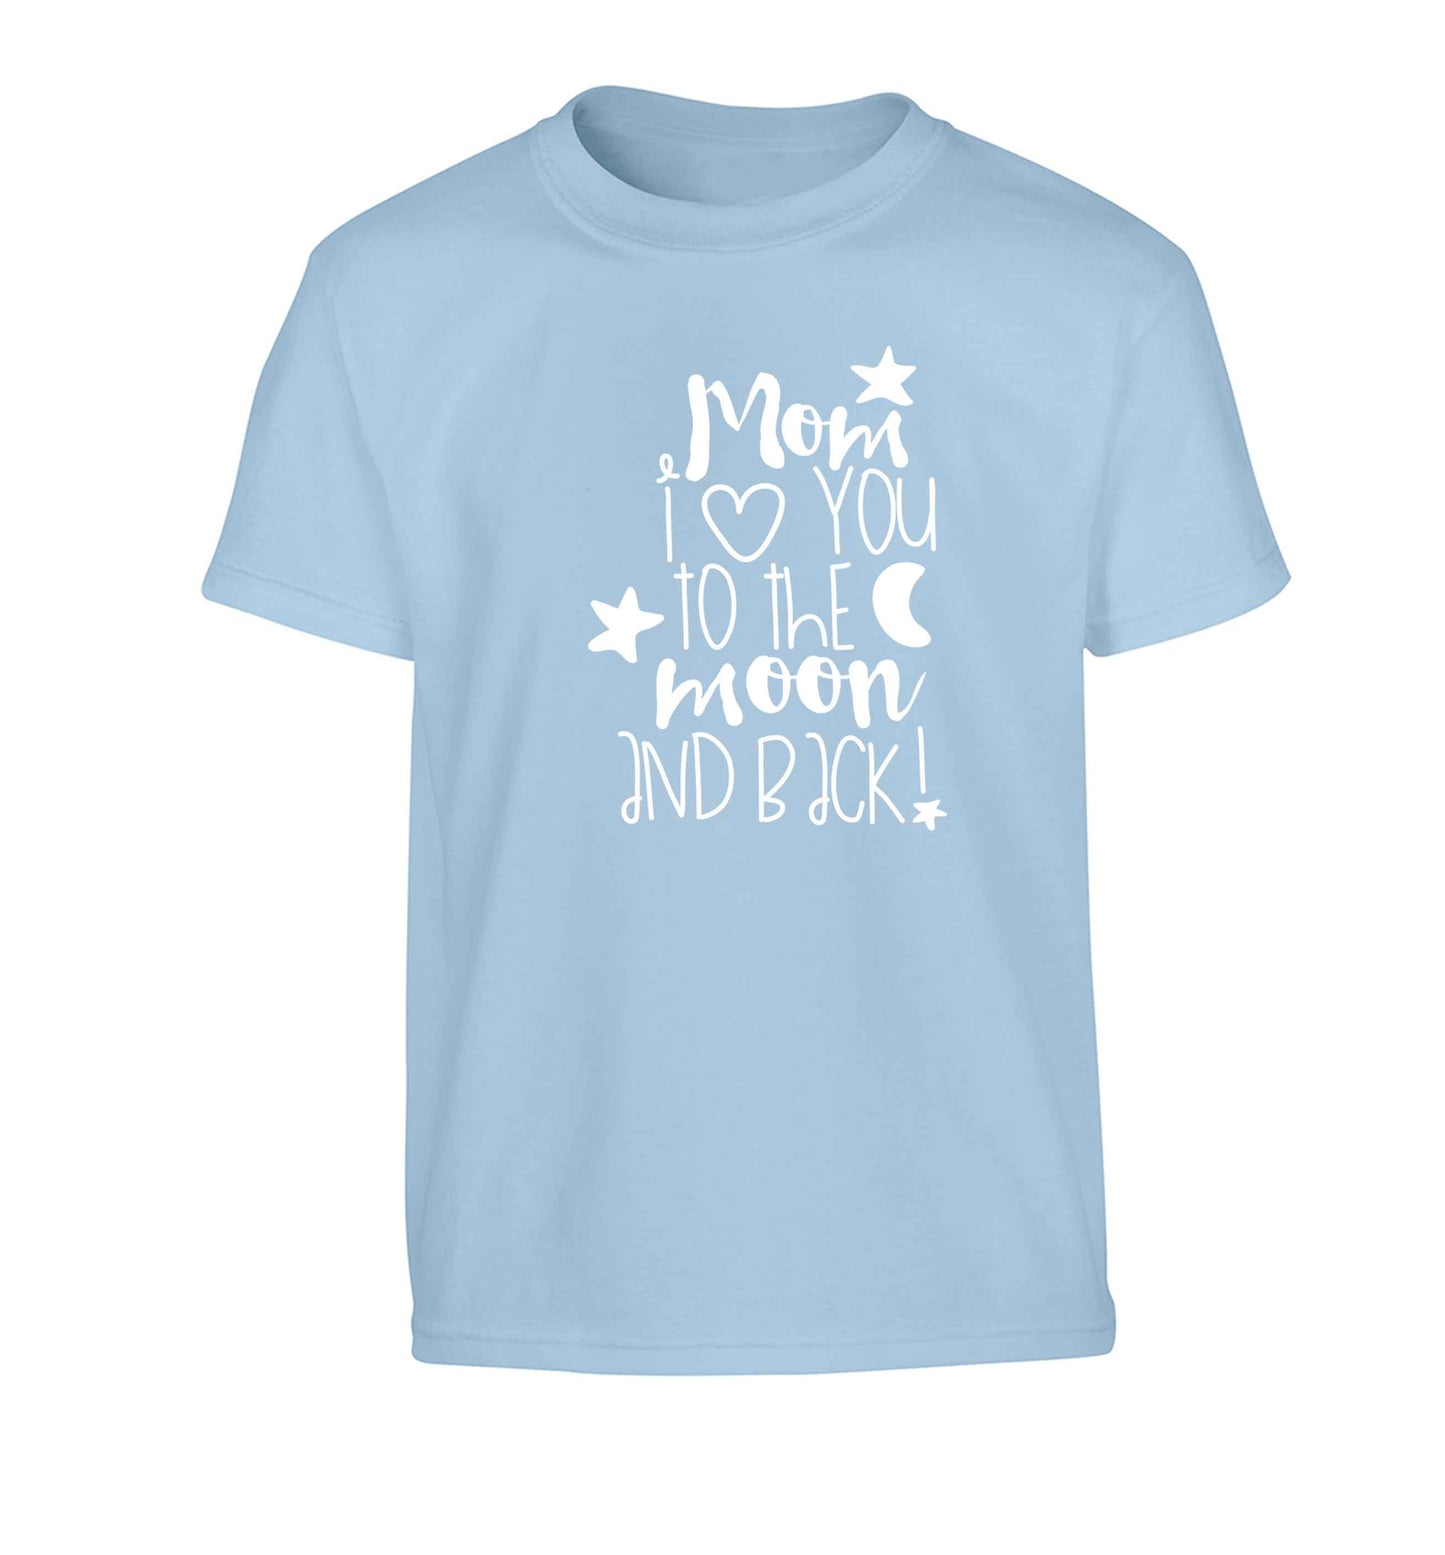 Mom I love you to the moon and back Children's light blue Tshirt 12-13 Years